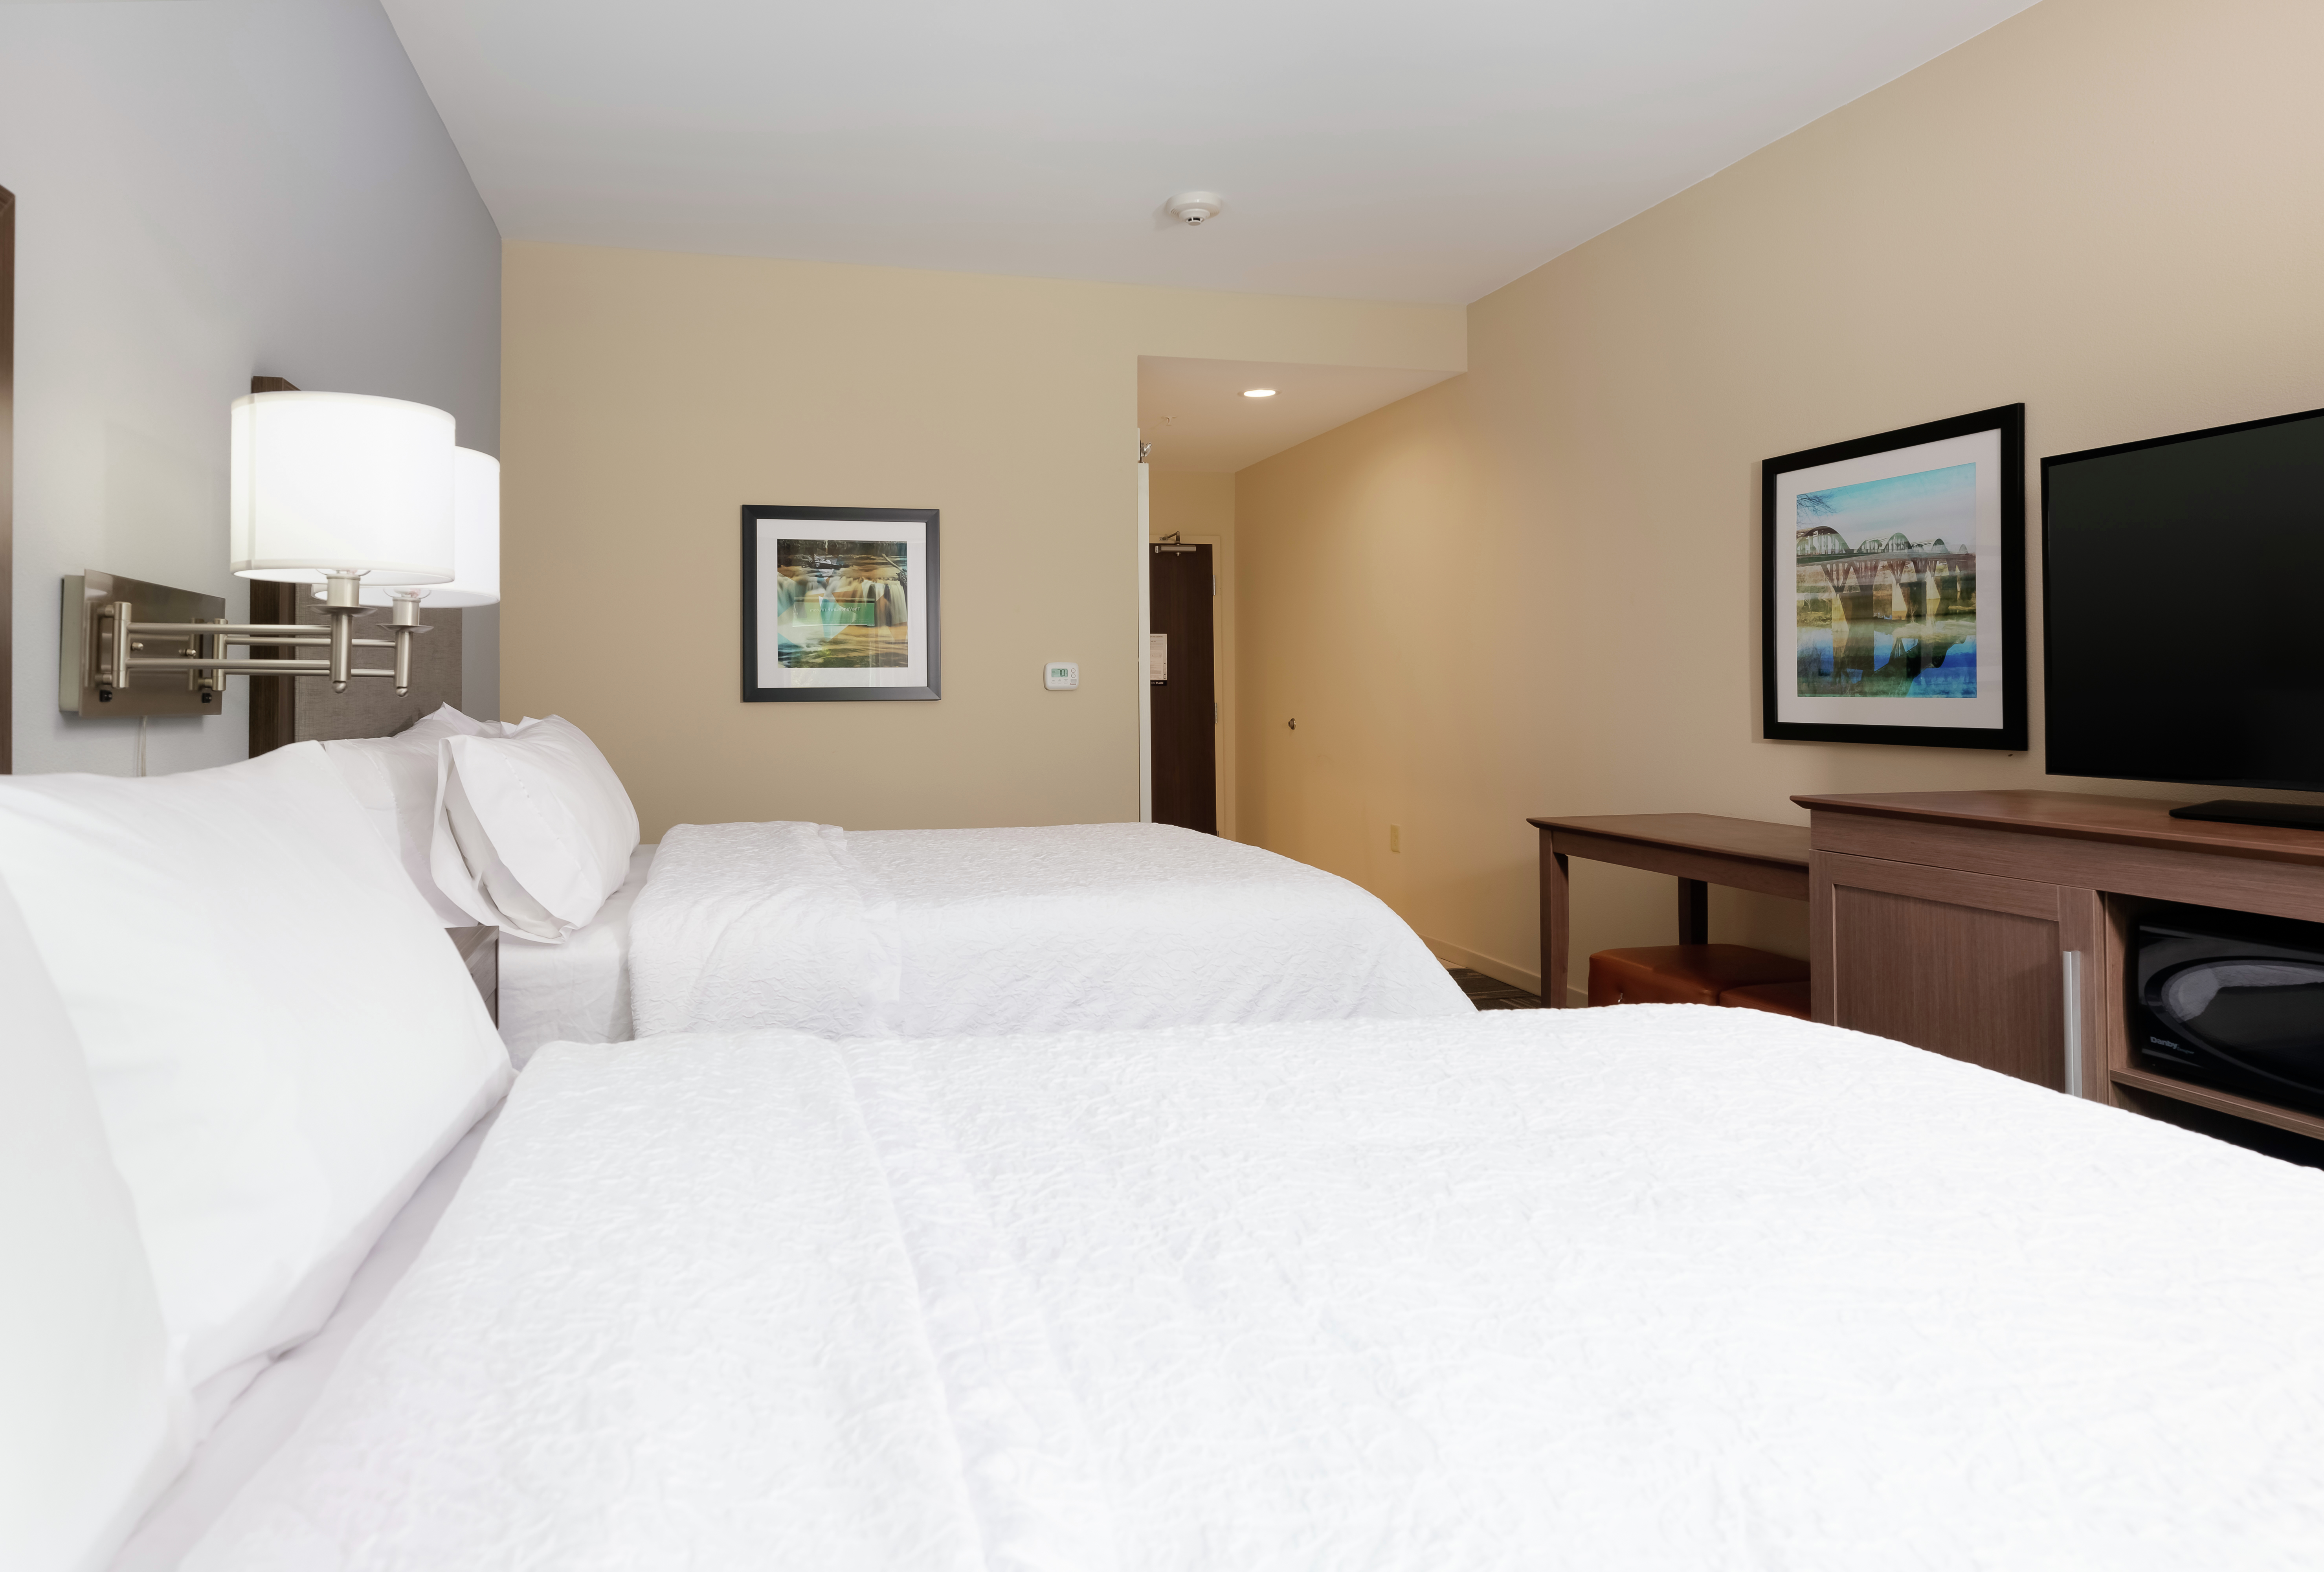 Accessible Guest Room with Queen Beds and HDTV